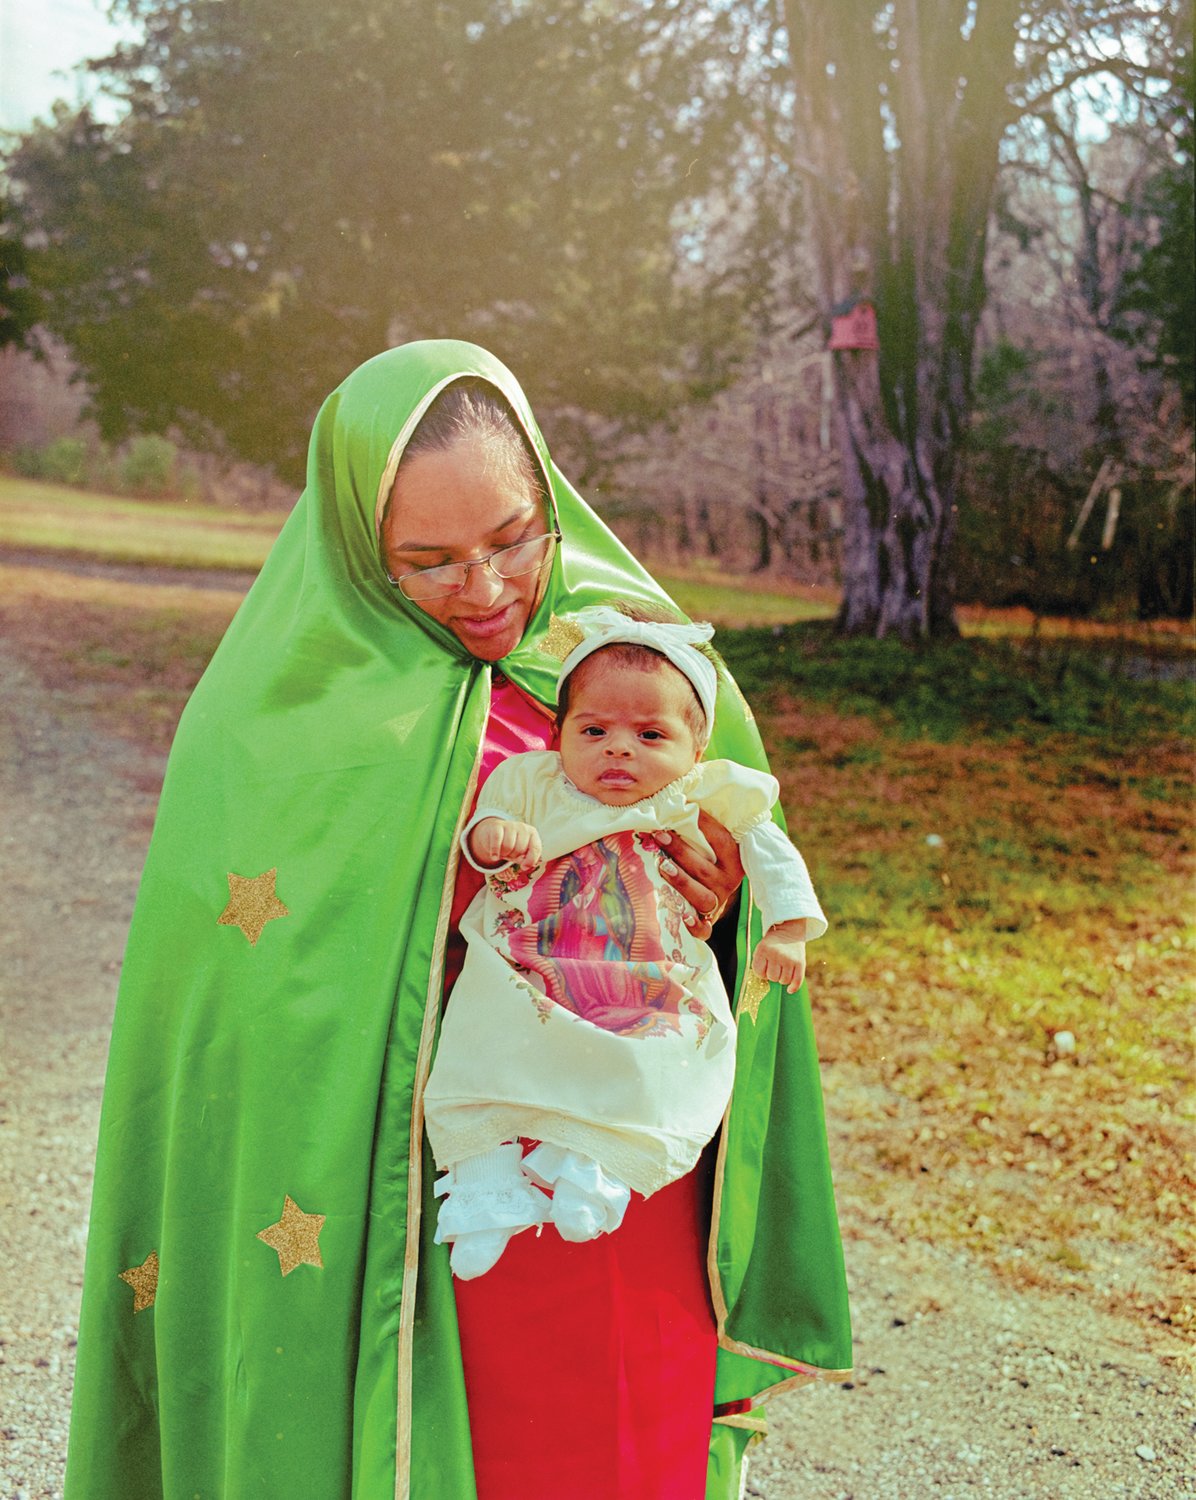 Cecilia Esquivel holds her daughter, Evelyn Hernandez, while dressed as the Virgin of Guadalupe in honor of the day’s pilgrimage last year in Siler City. Because of the pandemic, St. Julia Catholic Church held a scaled-down feast day celebration in 2020.